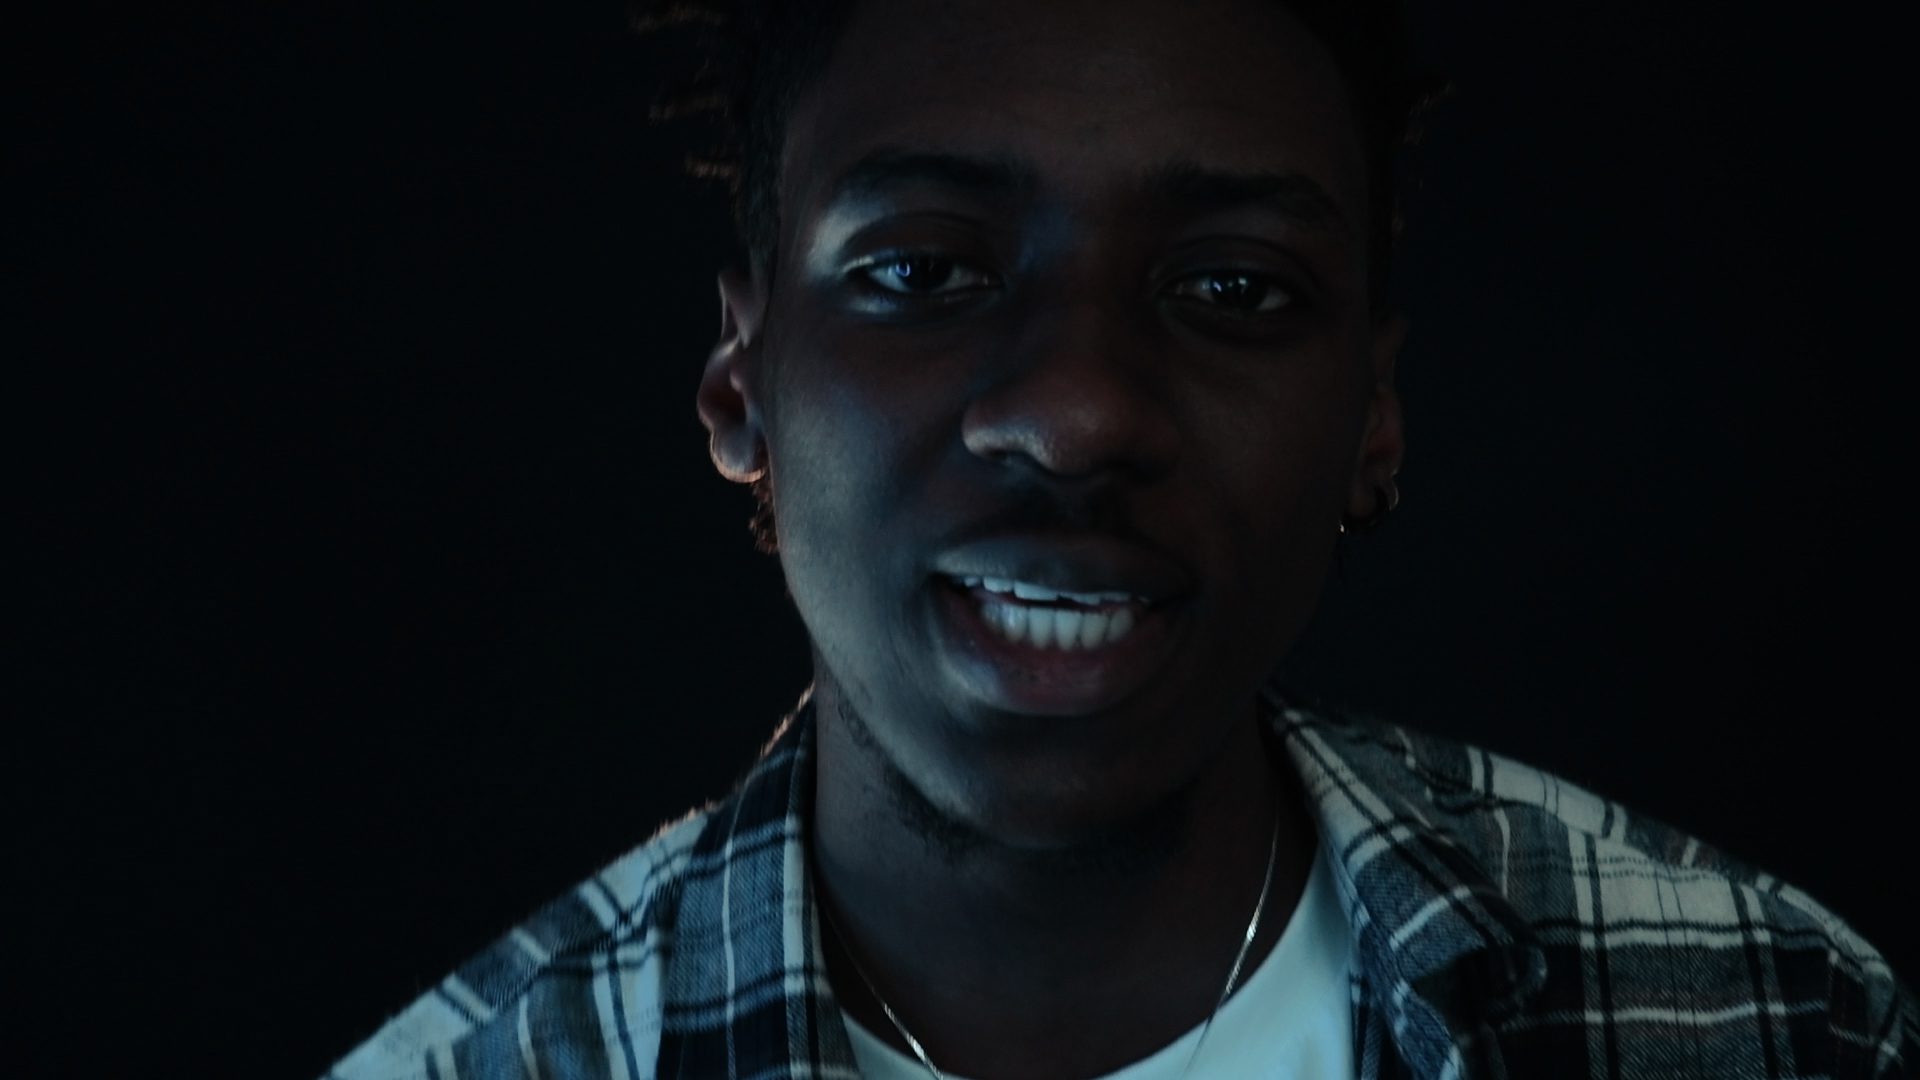 Watch Delis Make “Something Outta Nothing” In All-New Visuals.